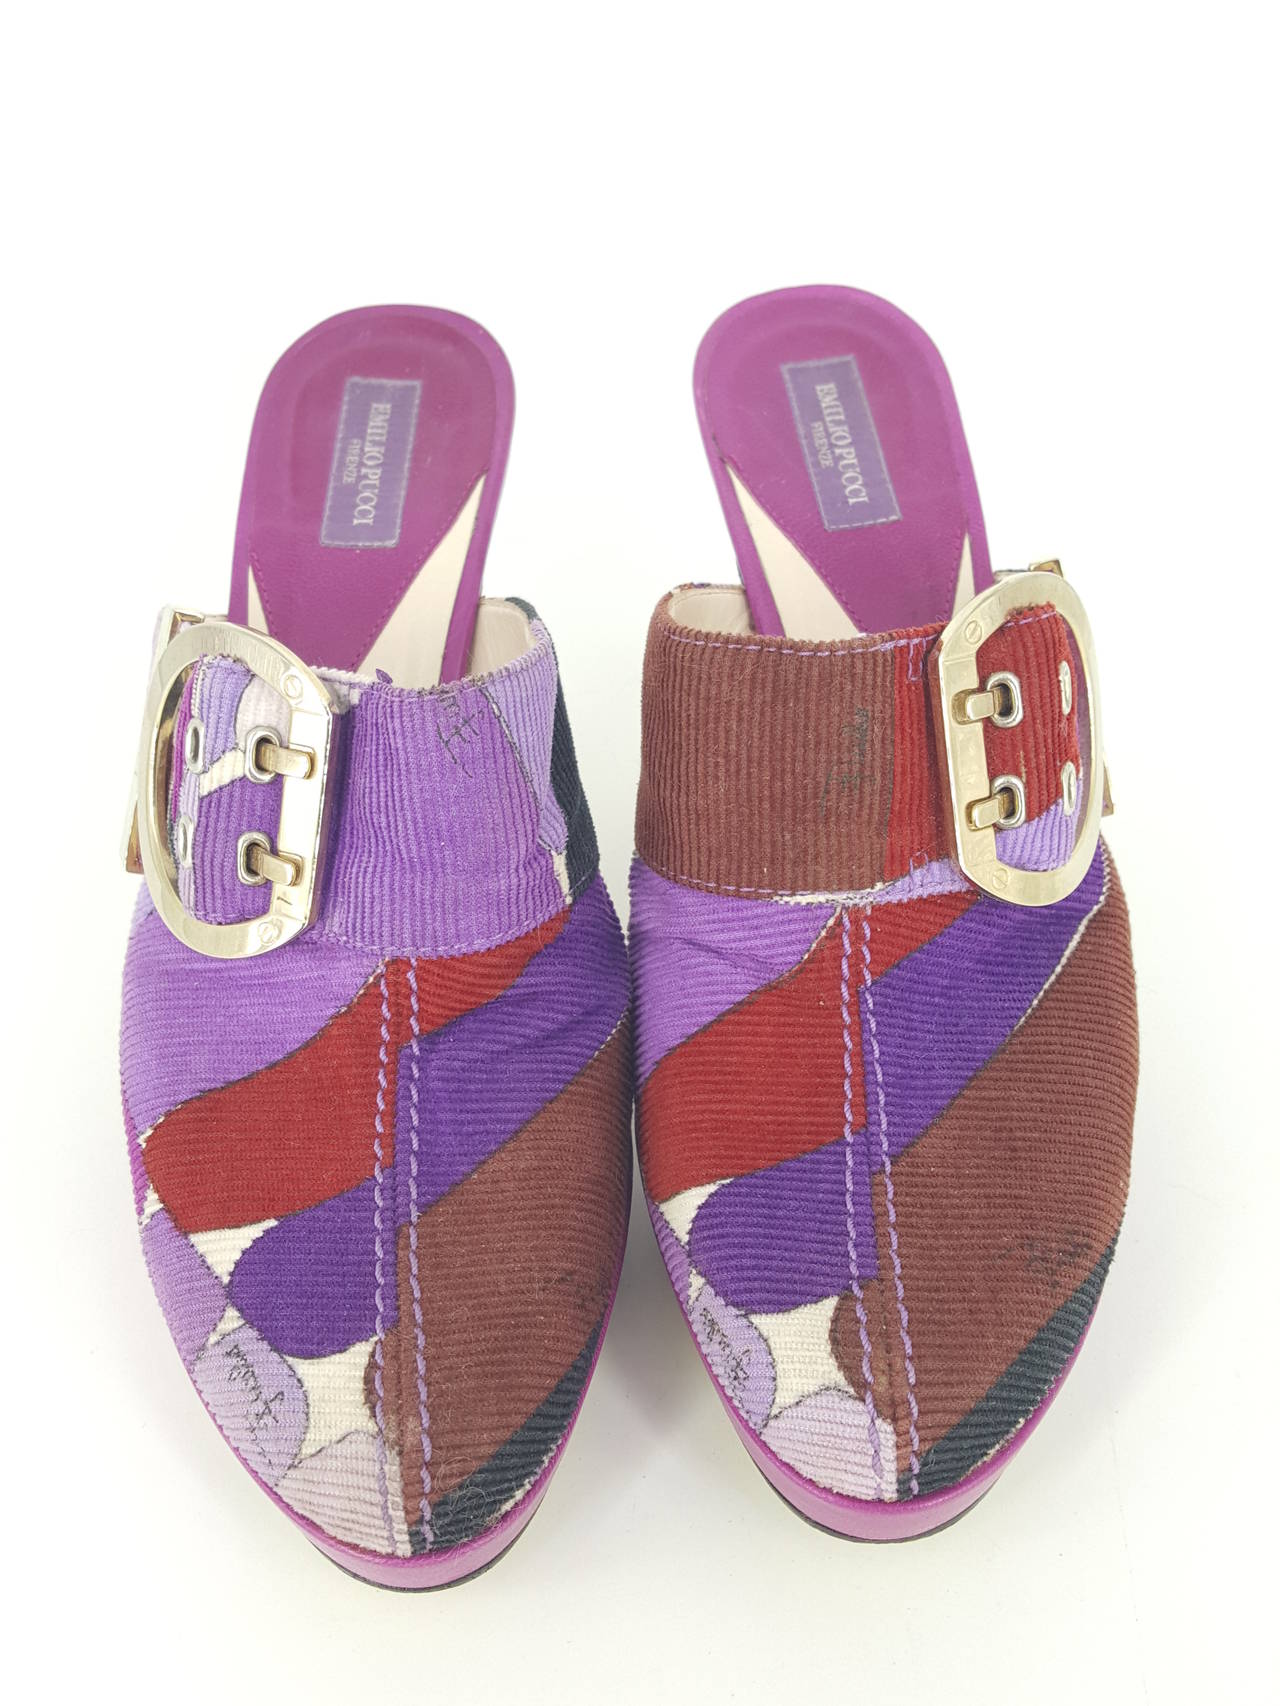 Offered for sale are these PUCCI plush corduroy mules in fuschia, dark rust, medium brown, and beige.  They are size 371/2 and have the appearance of being worn once,  There is a 2